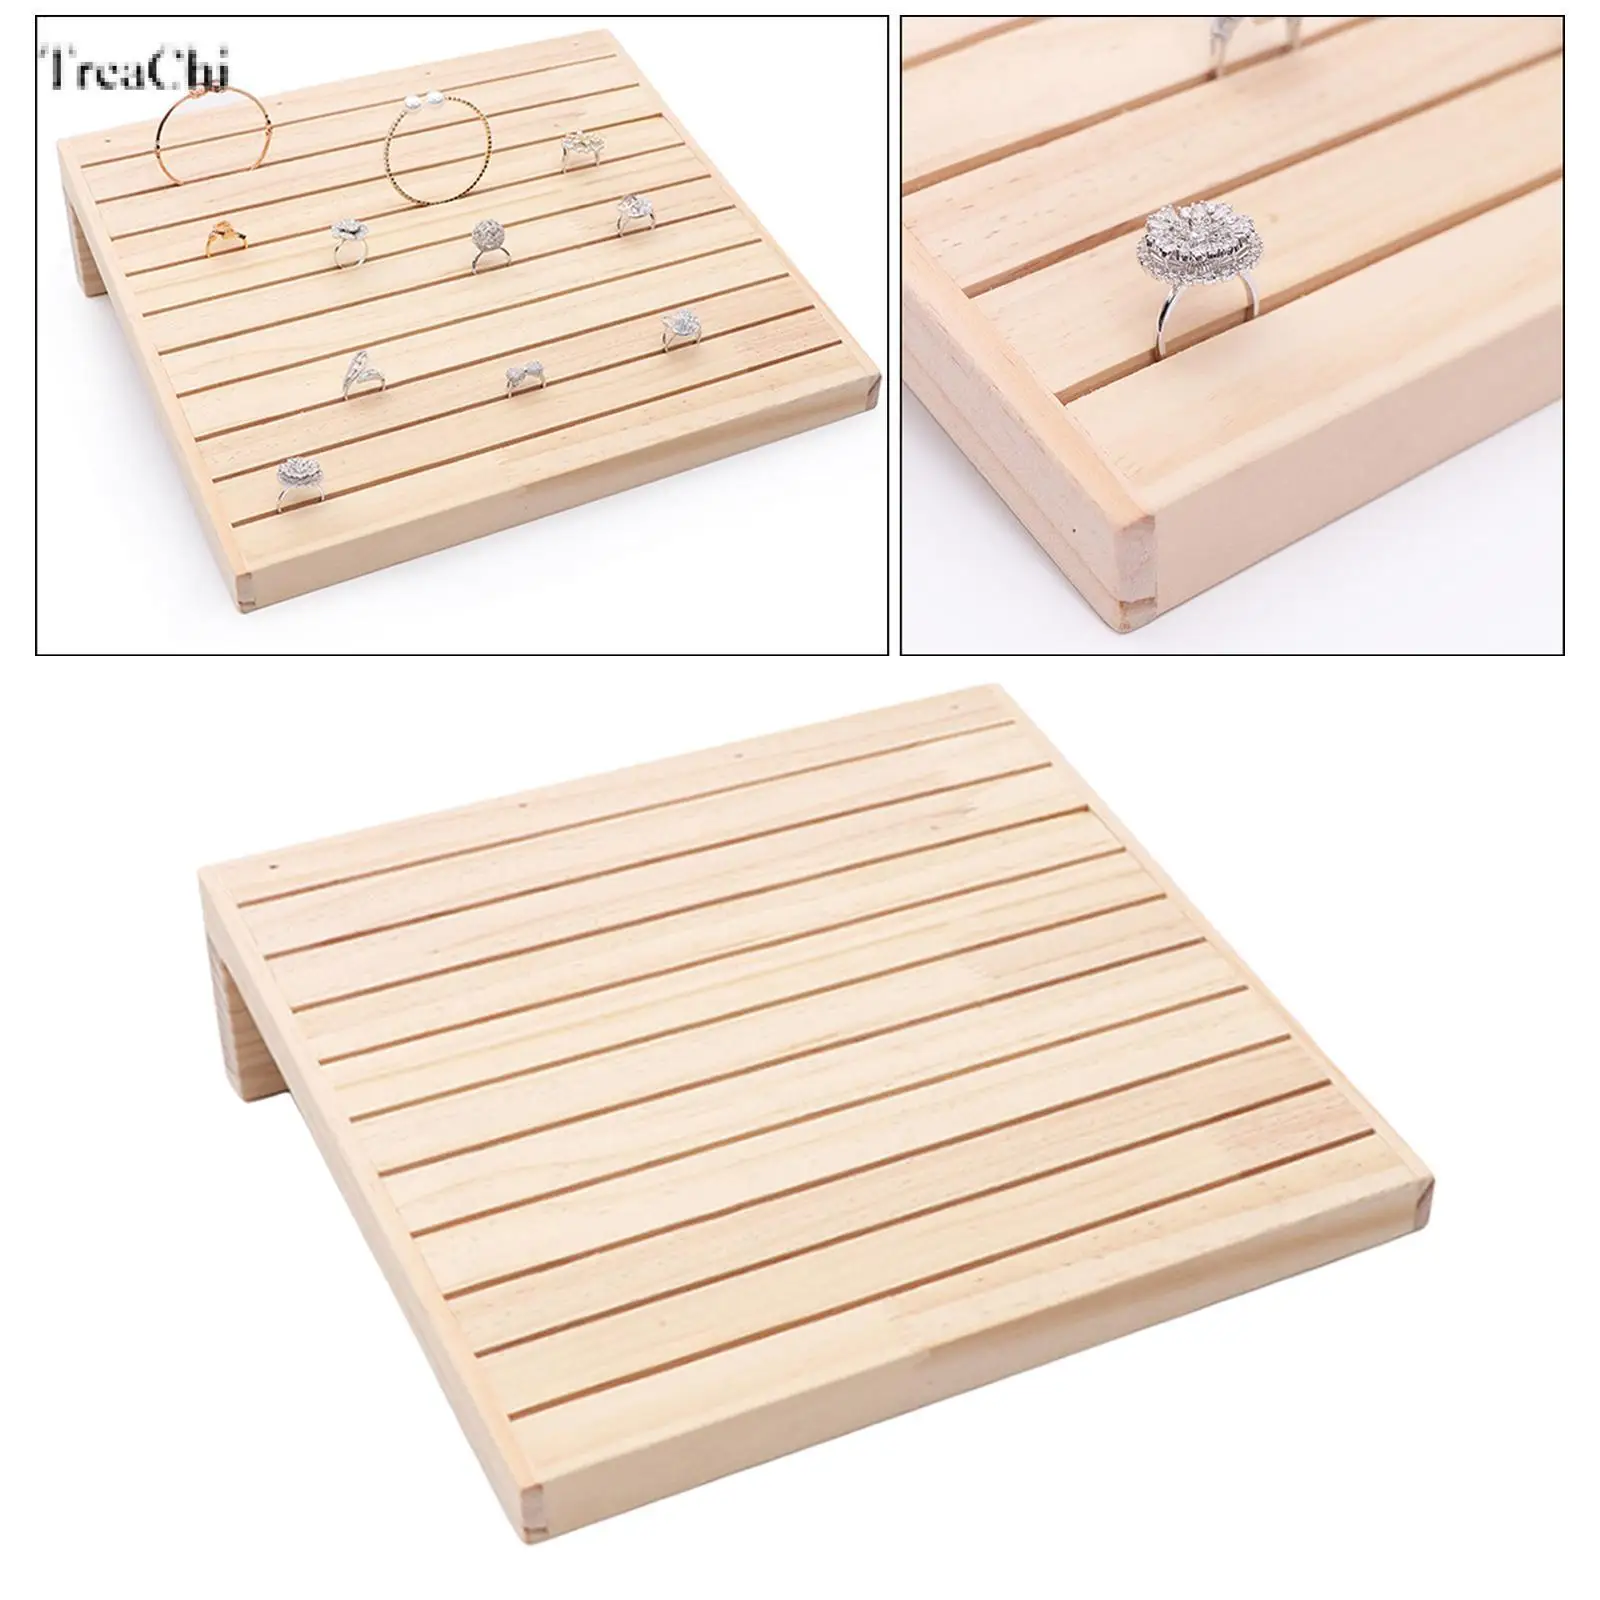 Wooden 10 Rows Ring Display Stand Rings Earrings Selling Earrings Trays Tabletop Home Organizing Rings Holder Jewelry Rack new arrival log ring plate base design wooden 5pcs set popular rings holder jewelry storage jewelry display stand ring rack